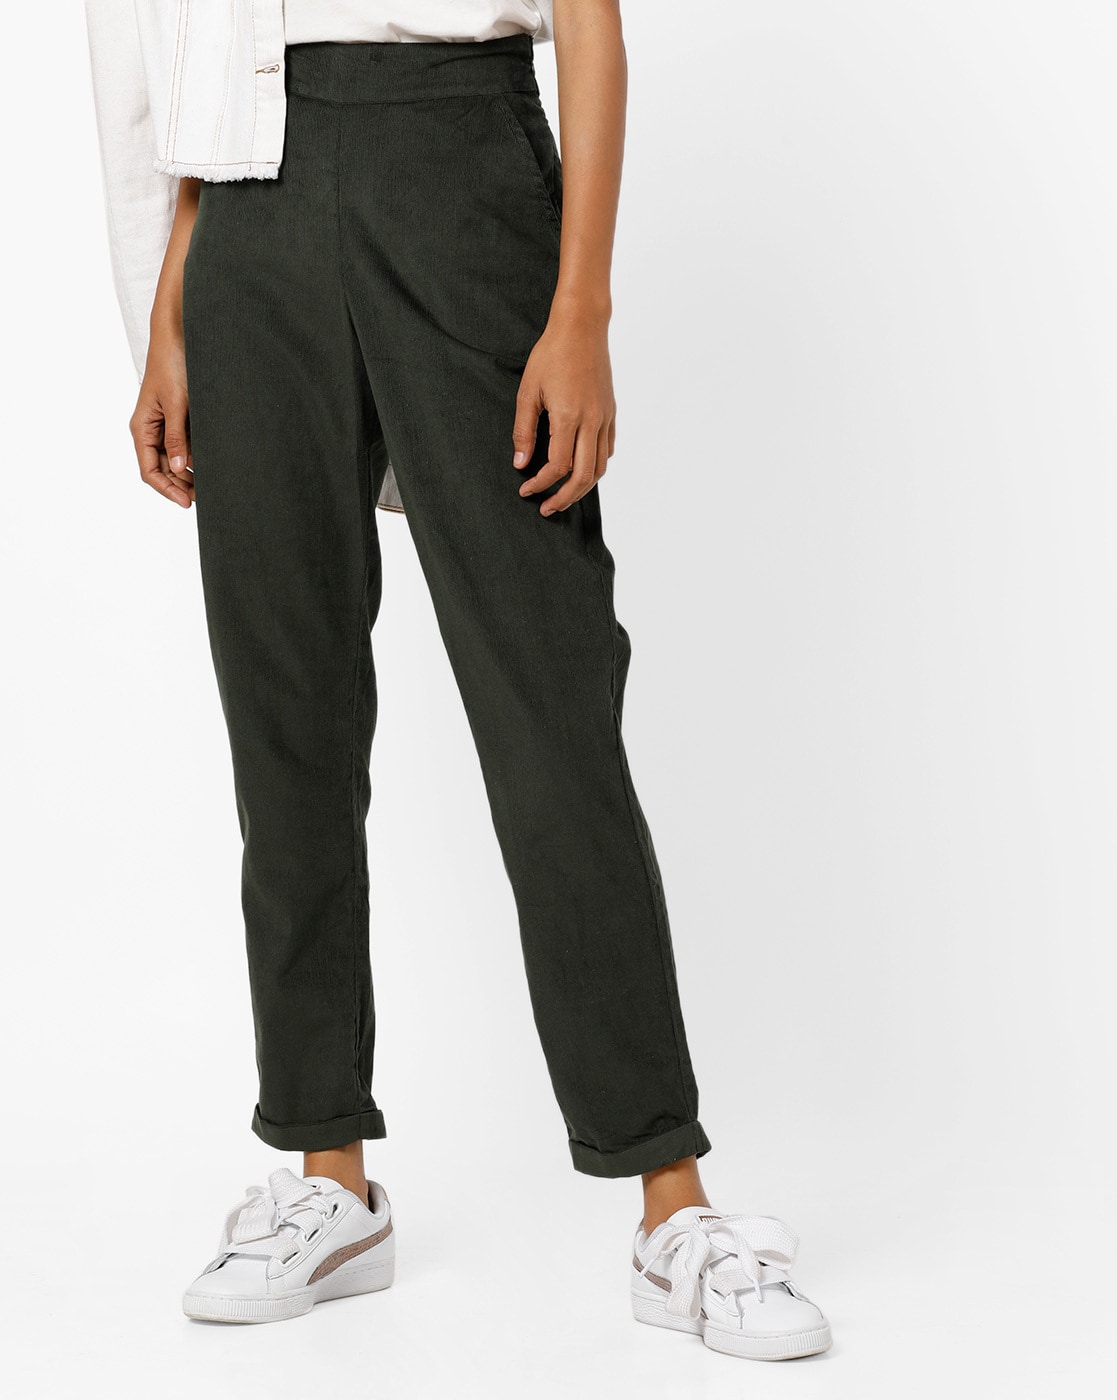 Monki slim fit corduroy trousers in green  Soft cord trousers with a slim  fit and high waist Made from an cotton blend with just a hi  Kläder  Stilar Hög midja